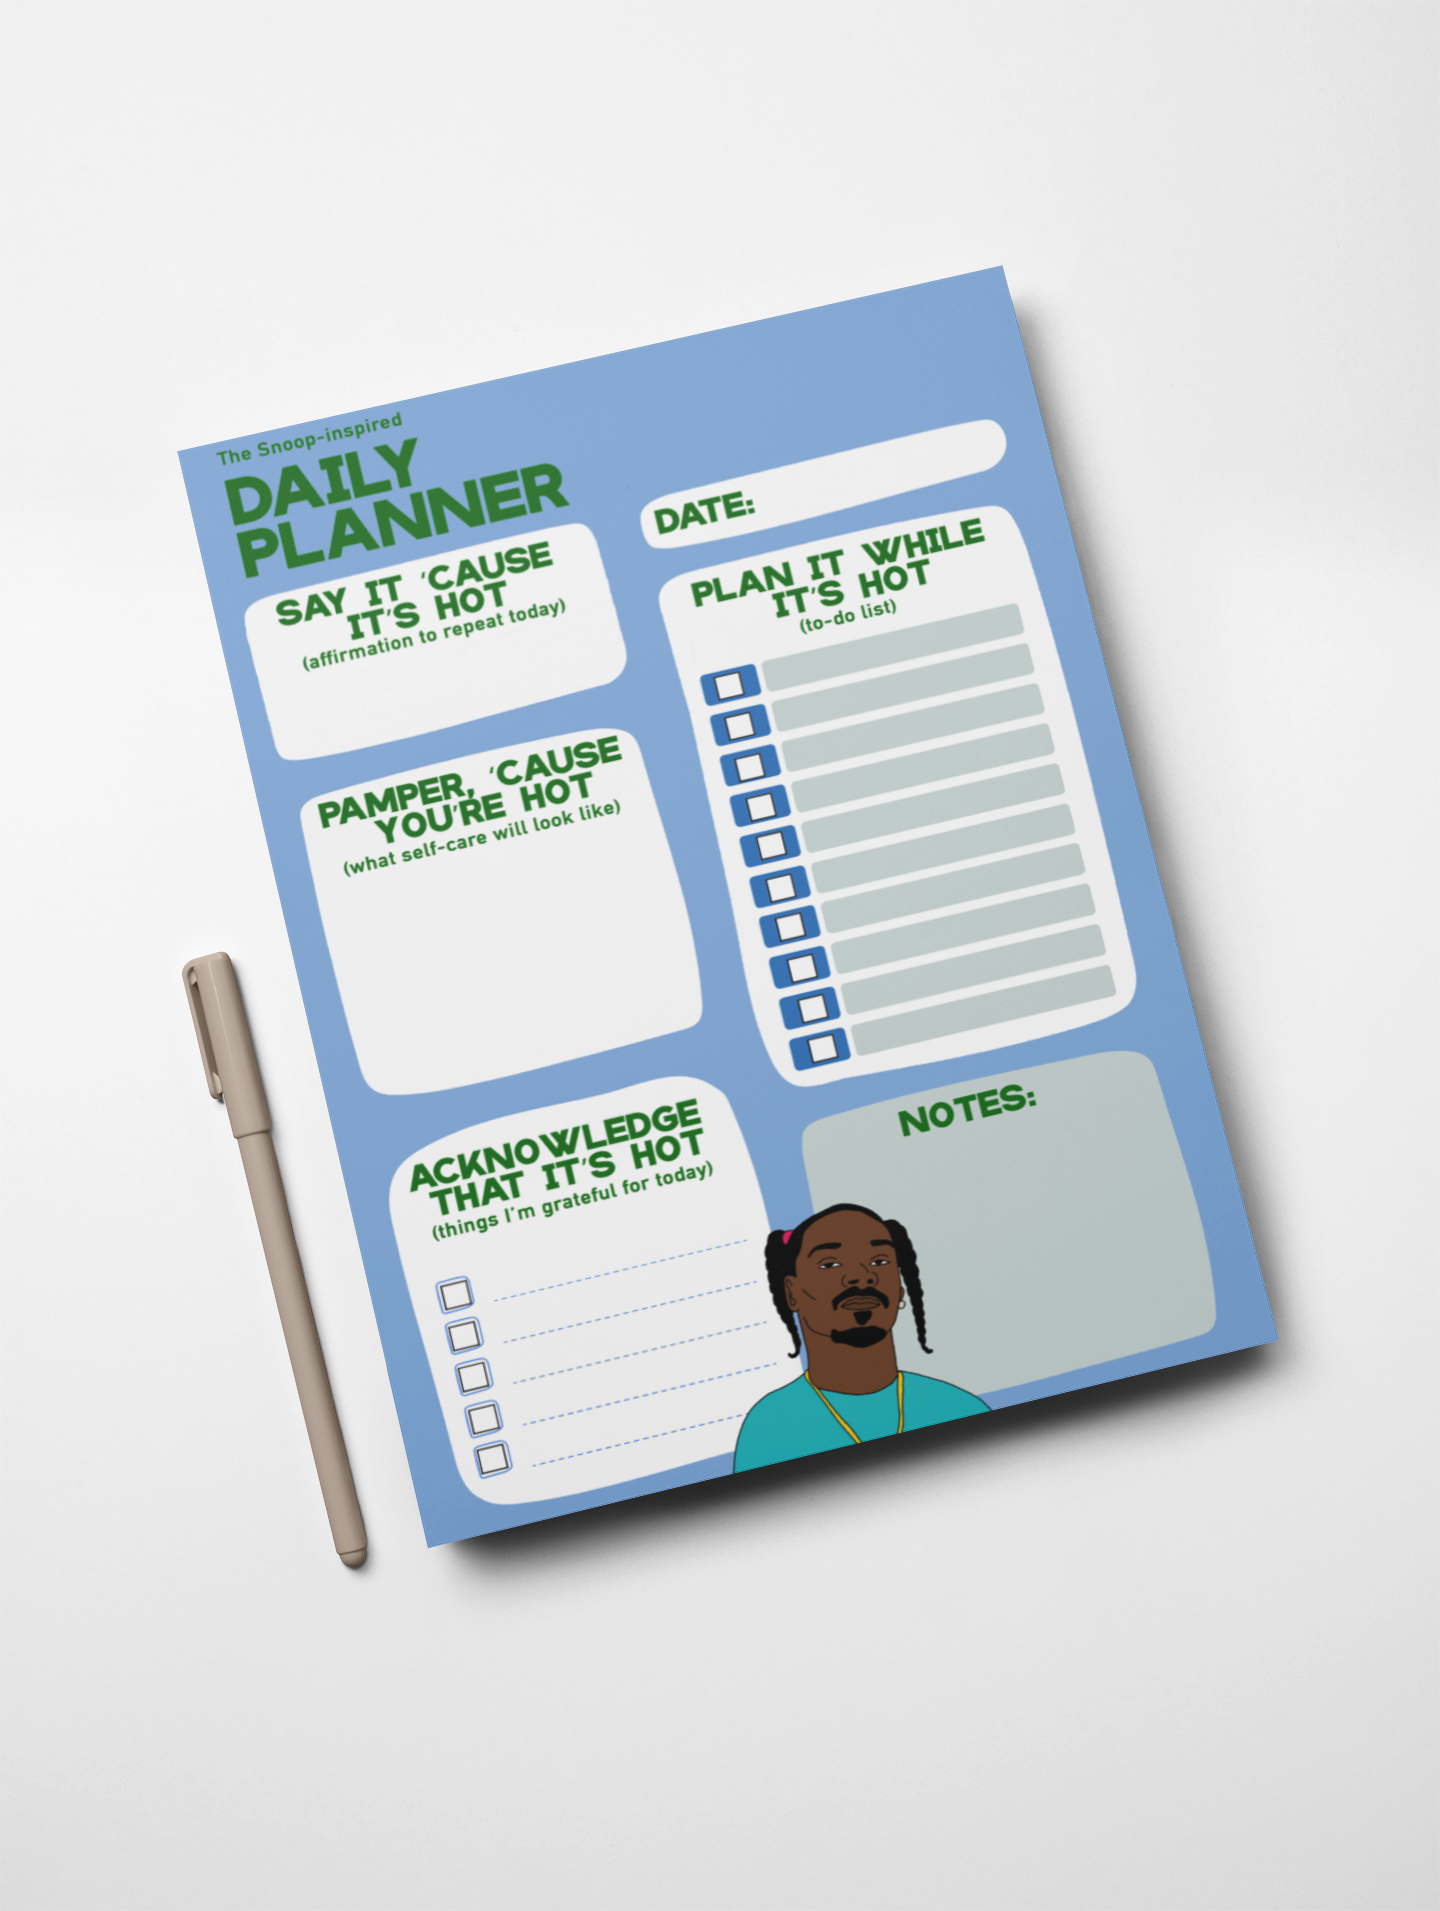 Snoop Dogg-inspired Digital Daily Planner | Printable | Self-Care Daily Planner | Boost Productivity | Easy to Use